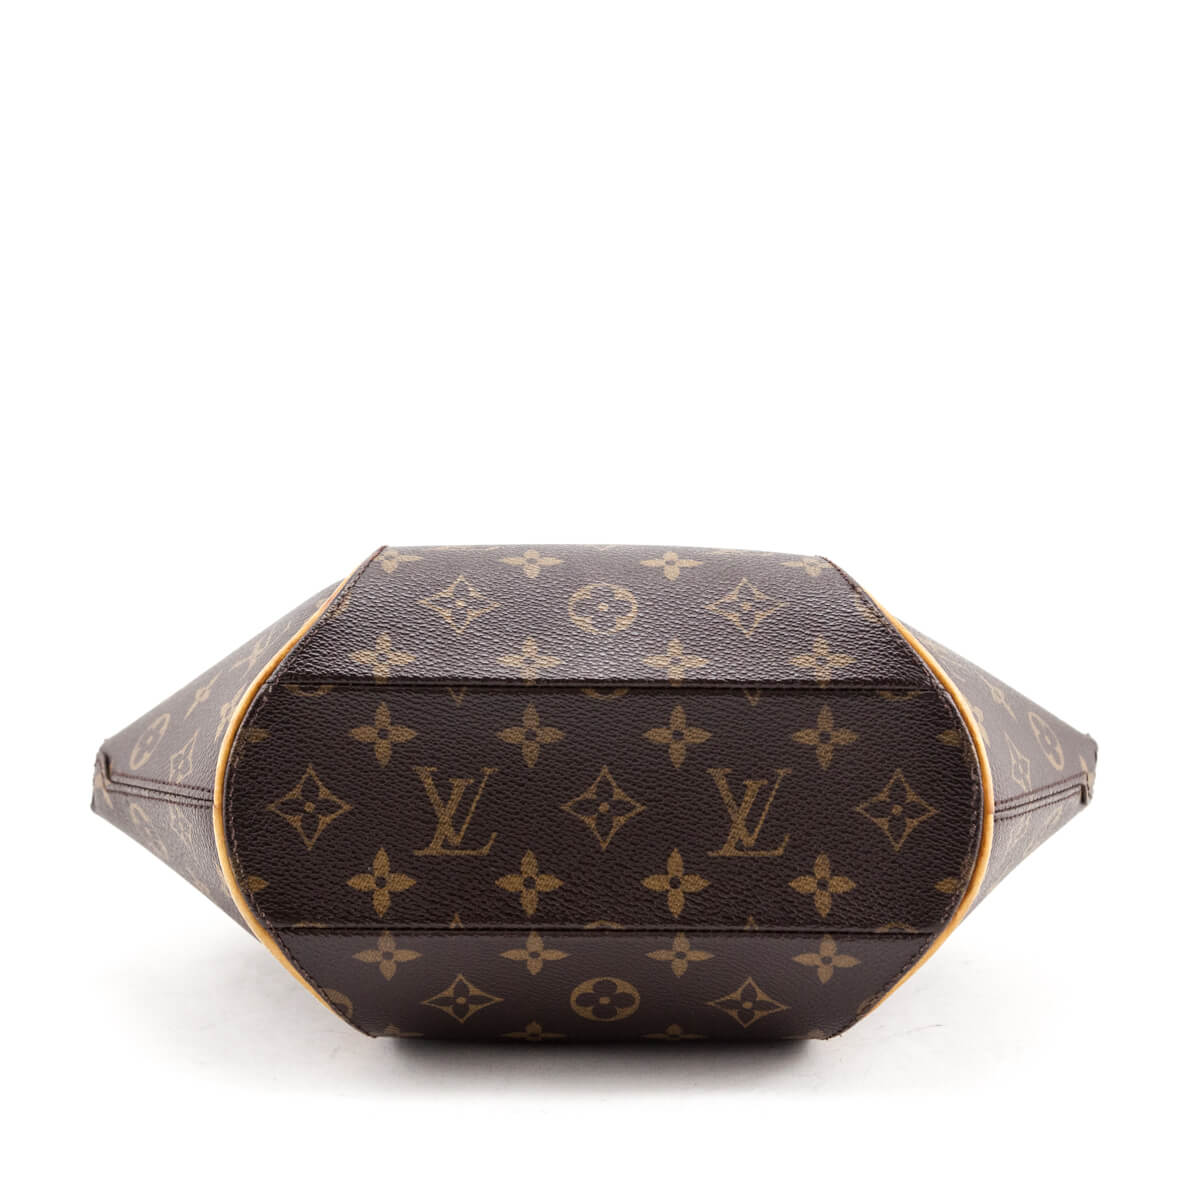 LV Ellipse Bag: Authentic & Discounted 199016/76